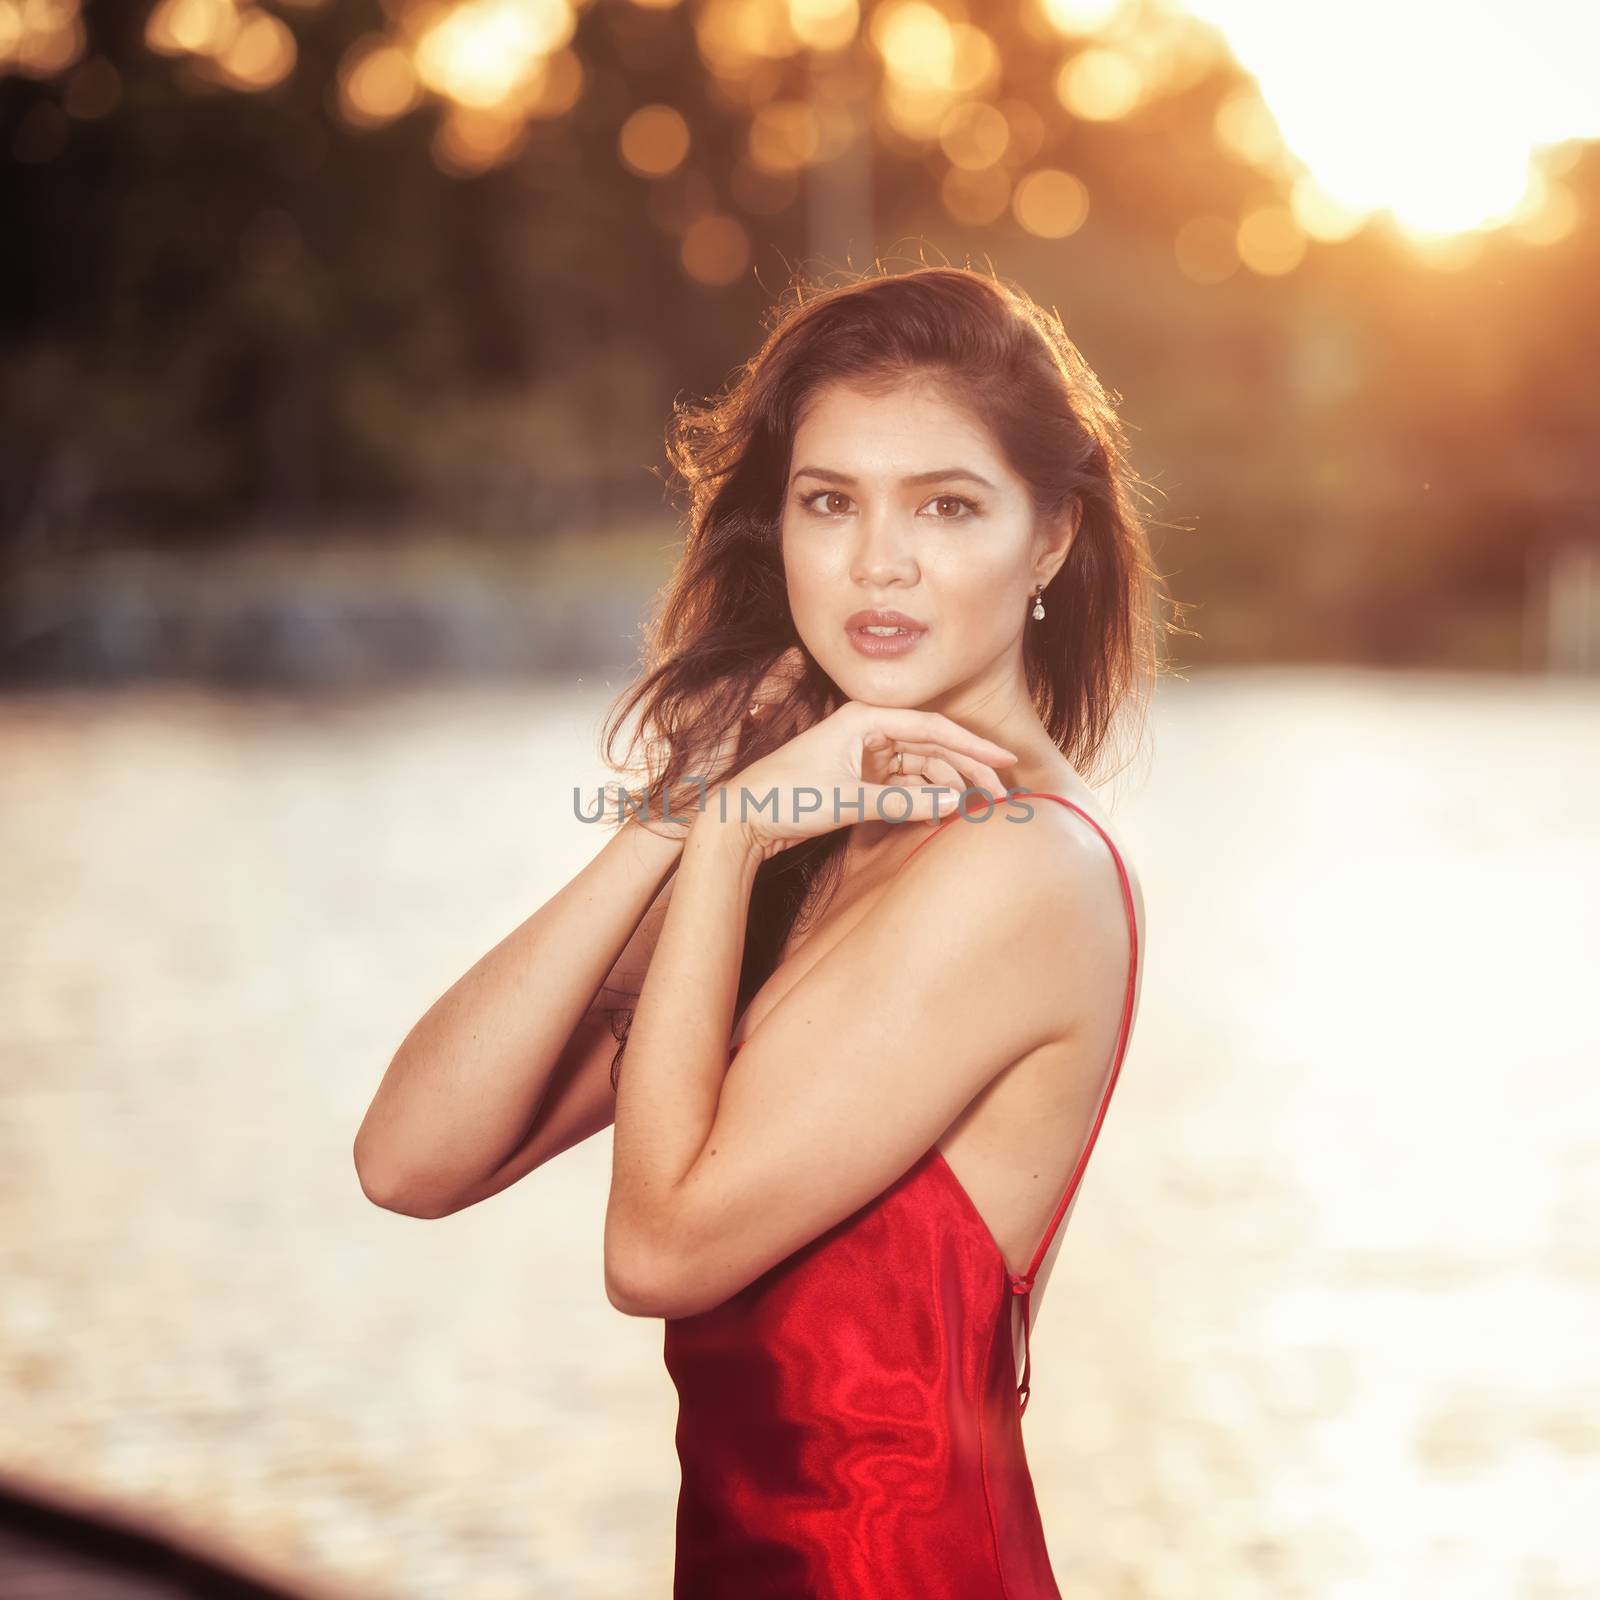 Beautiful young woman wearing a long red silk formal dress in the gardens in the afternoon. 